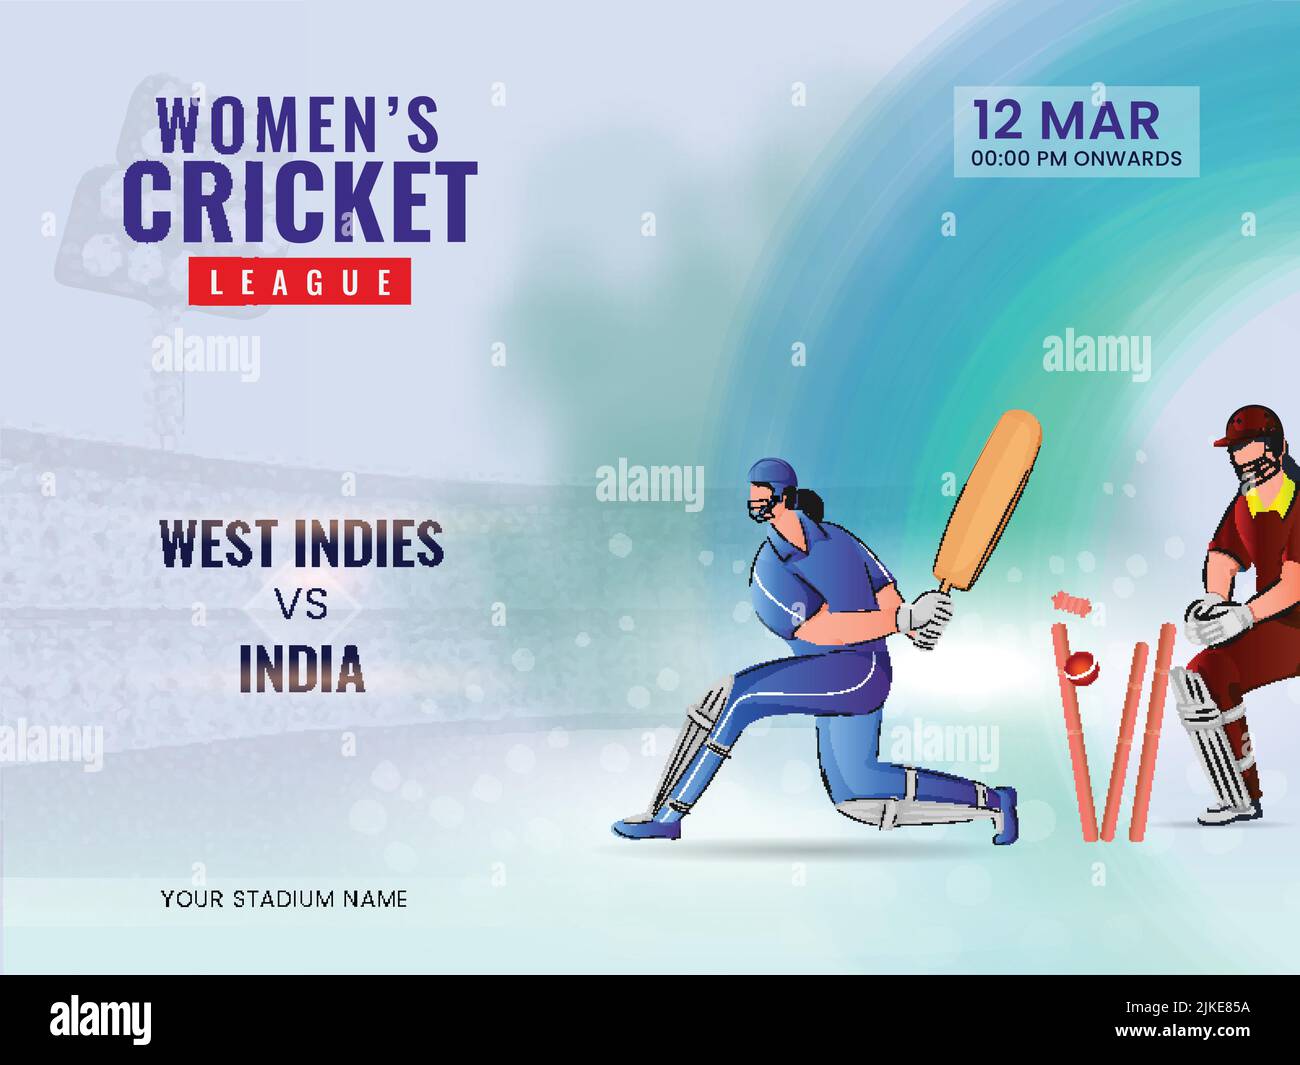 Women's Cricket Match Between West Indies VS India And Cricketer Players In Action Pose. Stock Vector